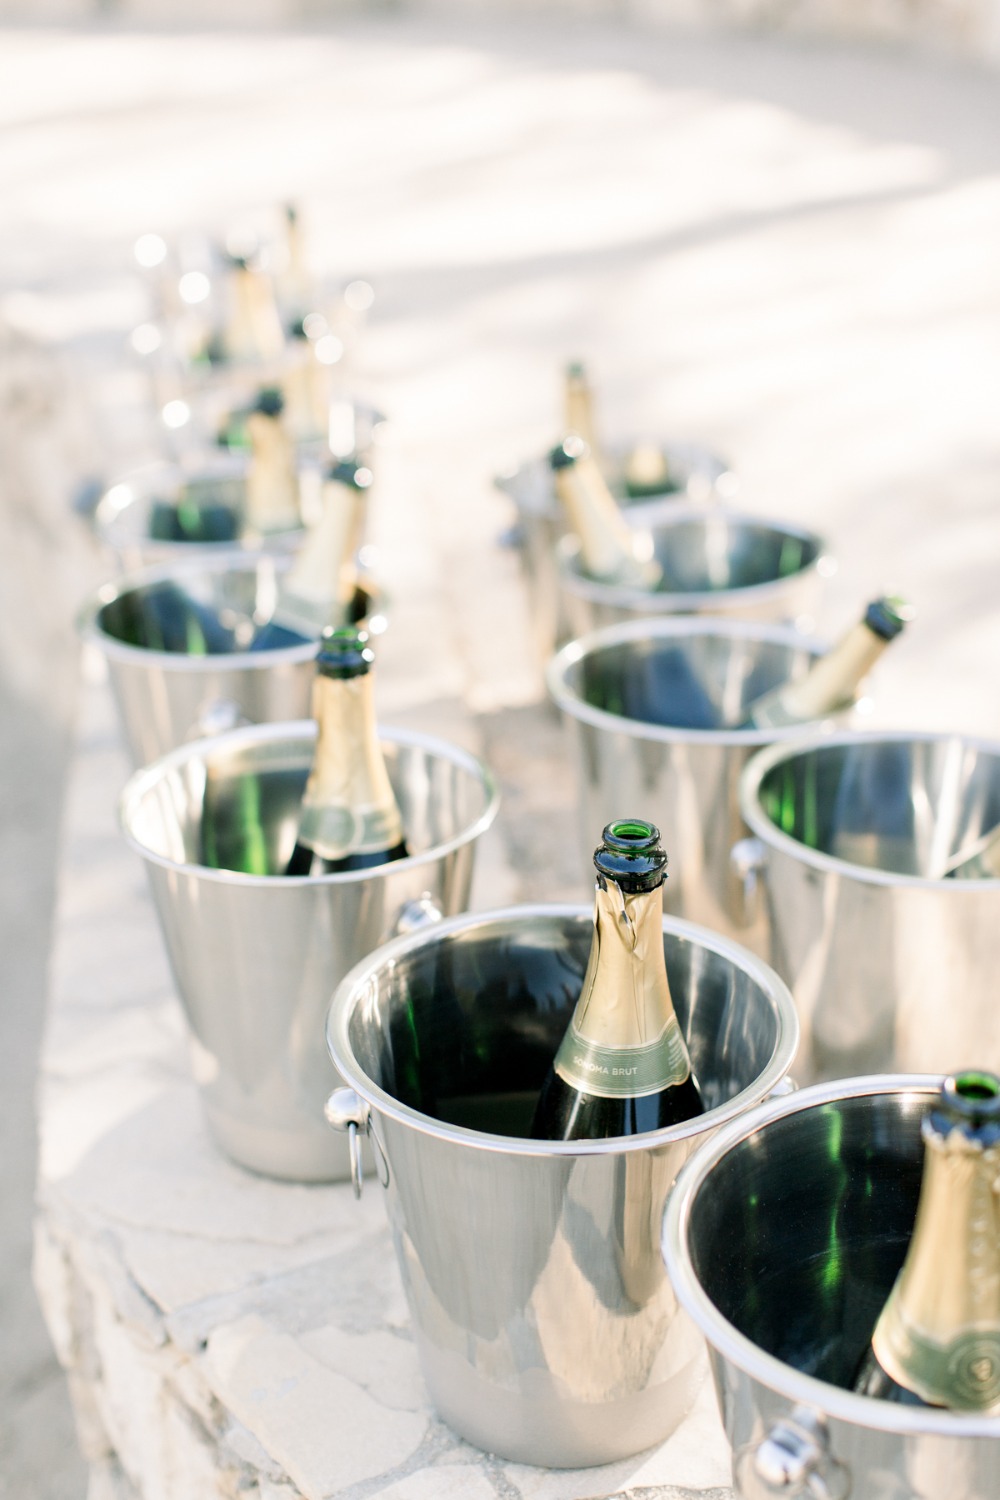 Ceremony champagne buckets